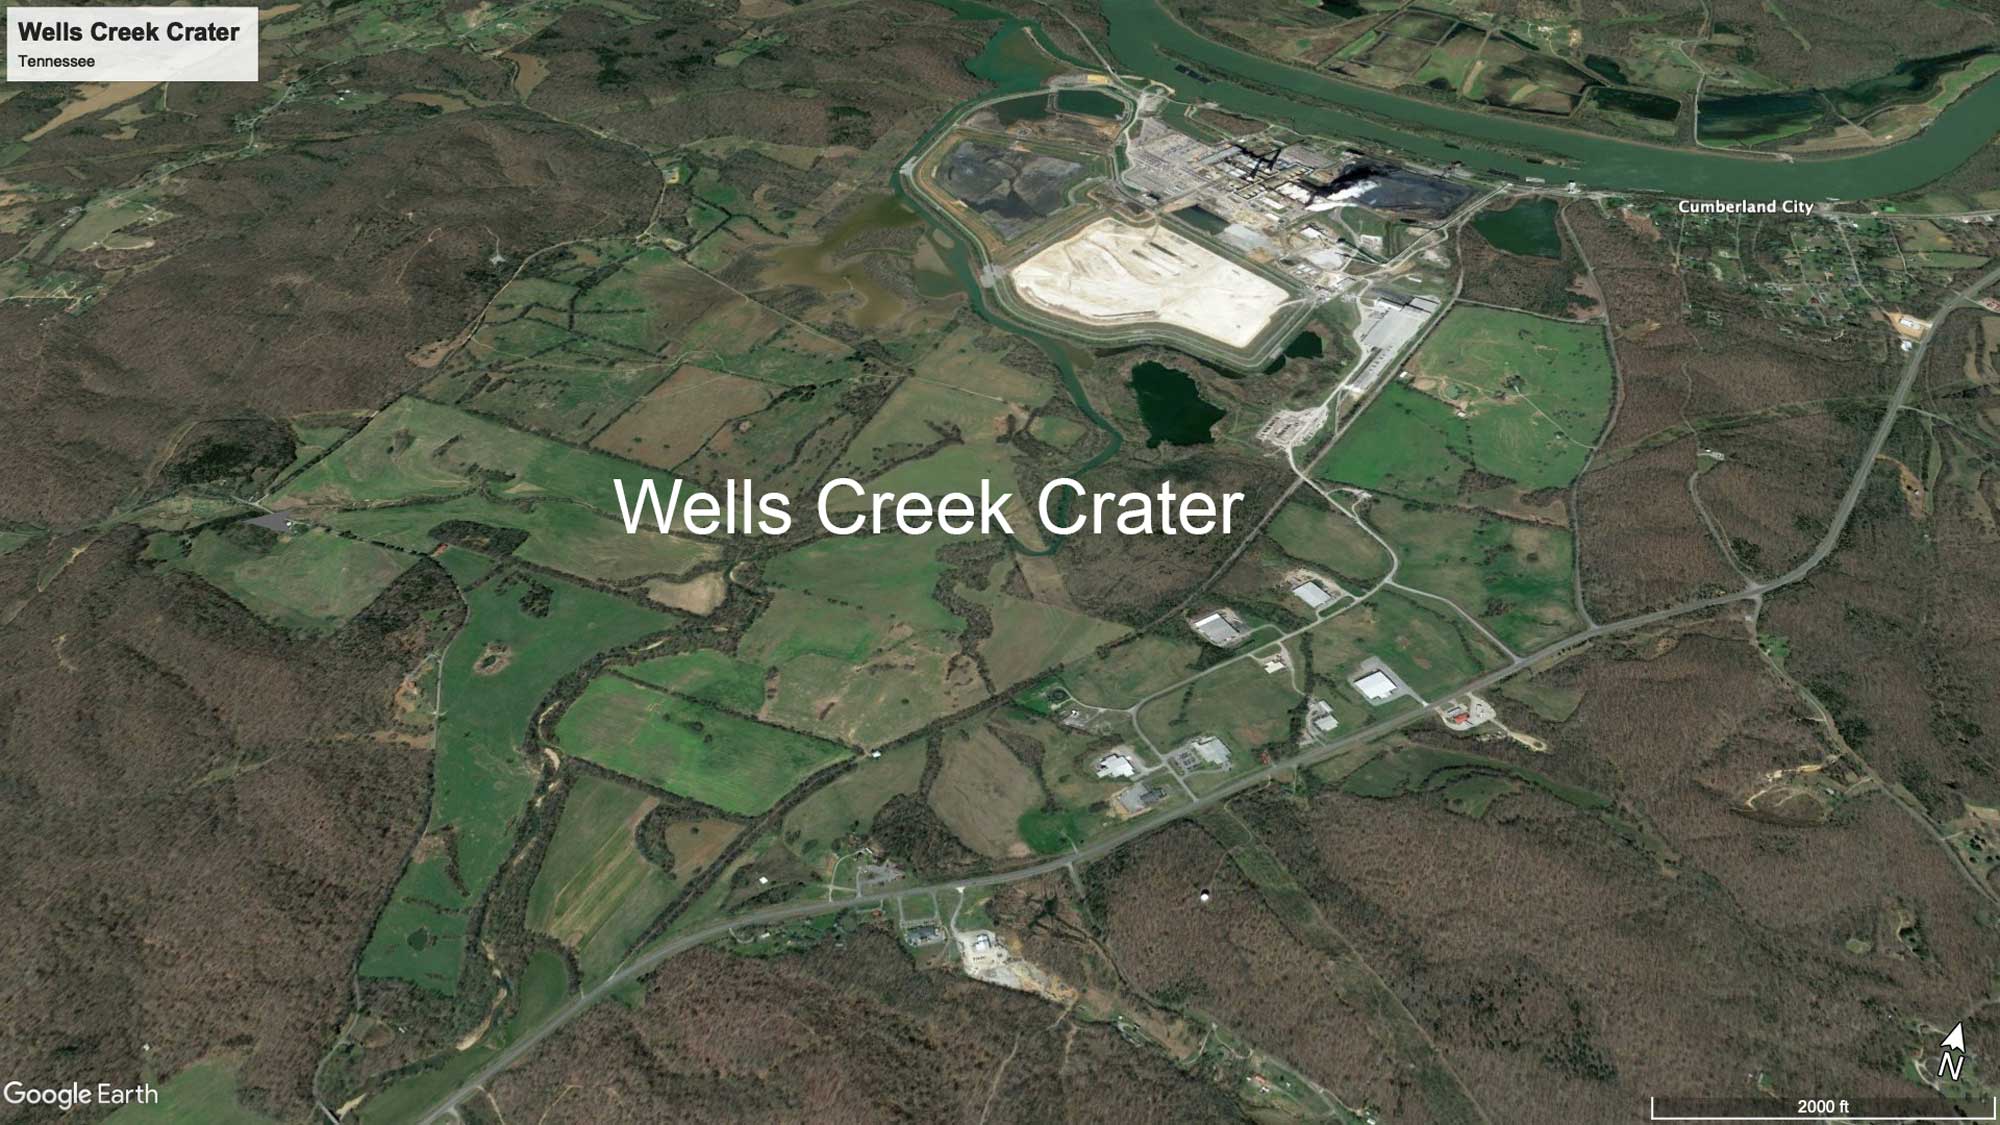 Google Earth satellite view of Wells Creek Crater near Cumberland City, Tennessee.